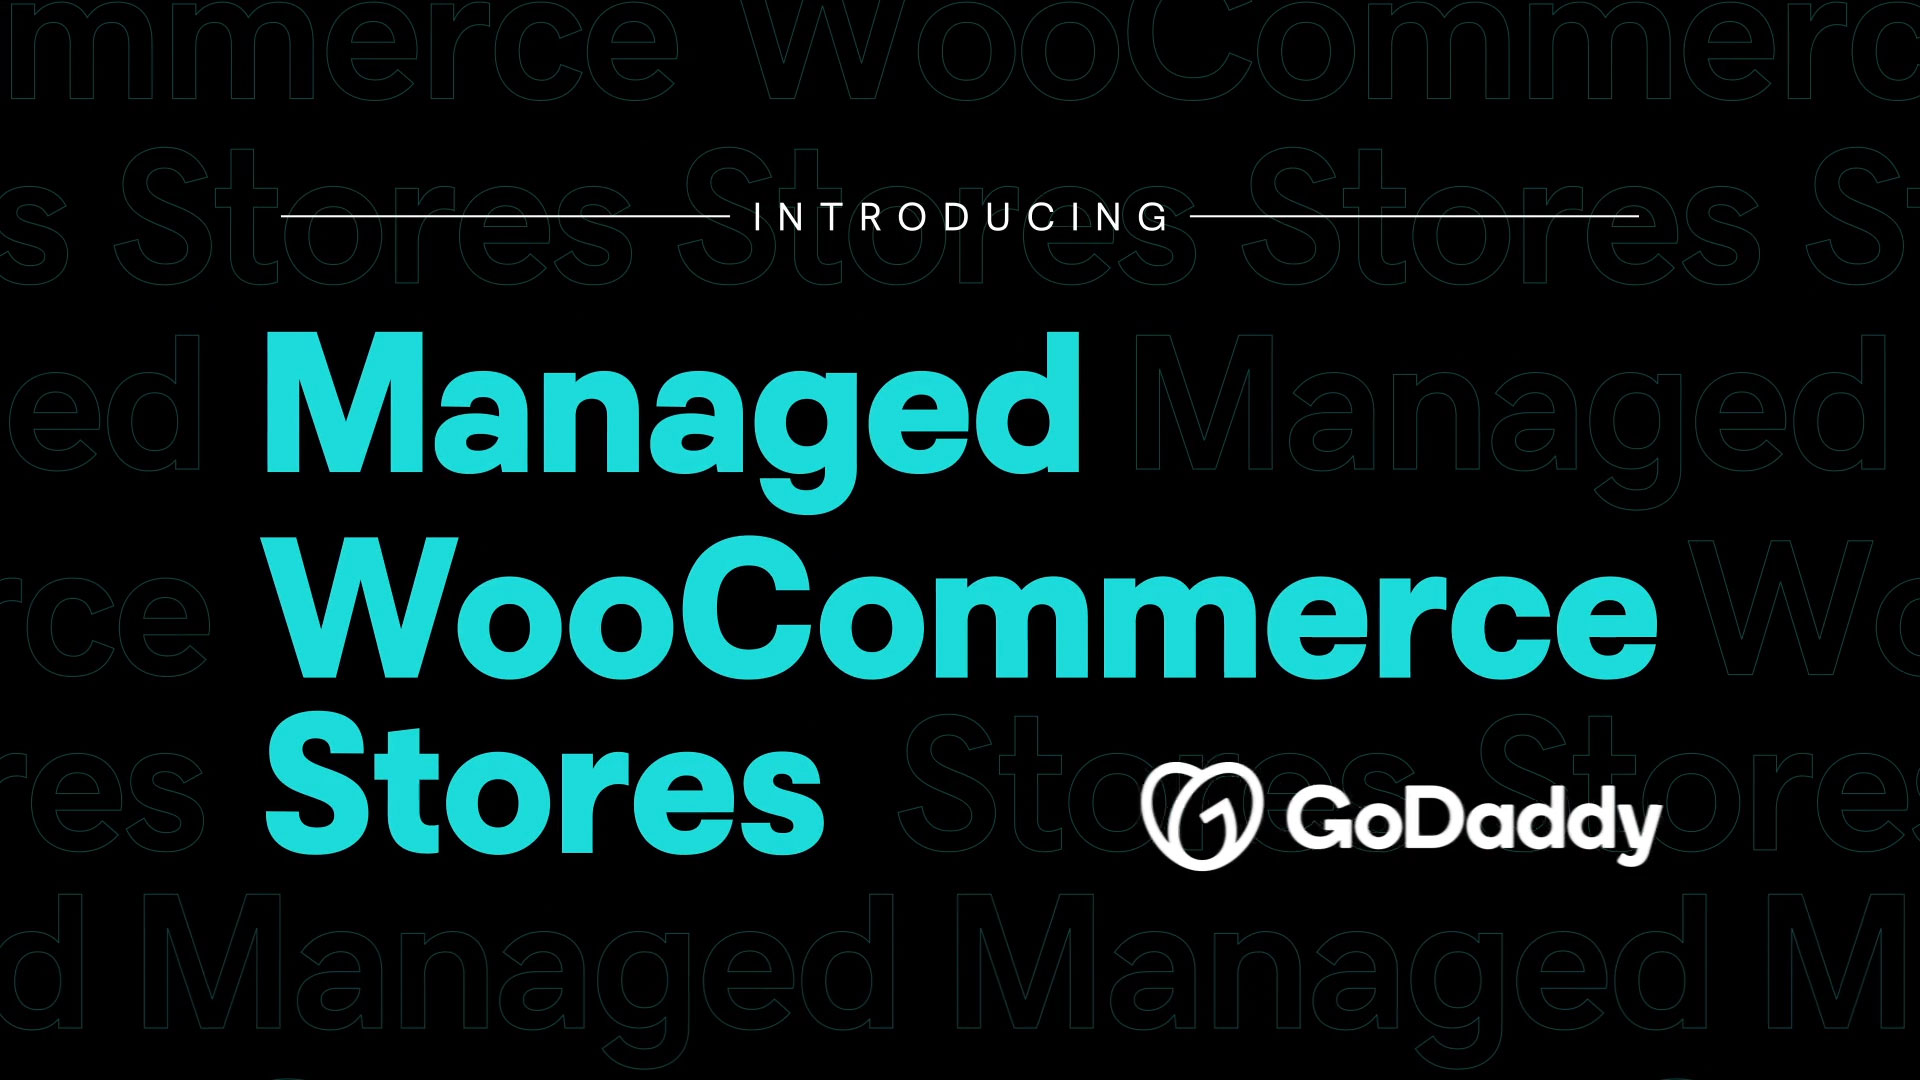 GoDaddy’s Managed WooCommerce Stores solution allows businesses to sell wherever customers shop through flexible, scalable and fully managed WordPress e-commerce stores.